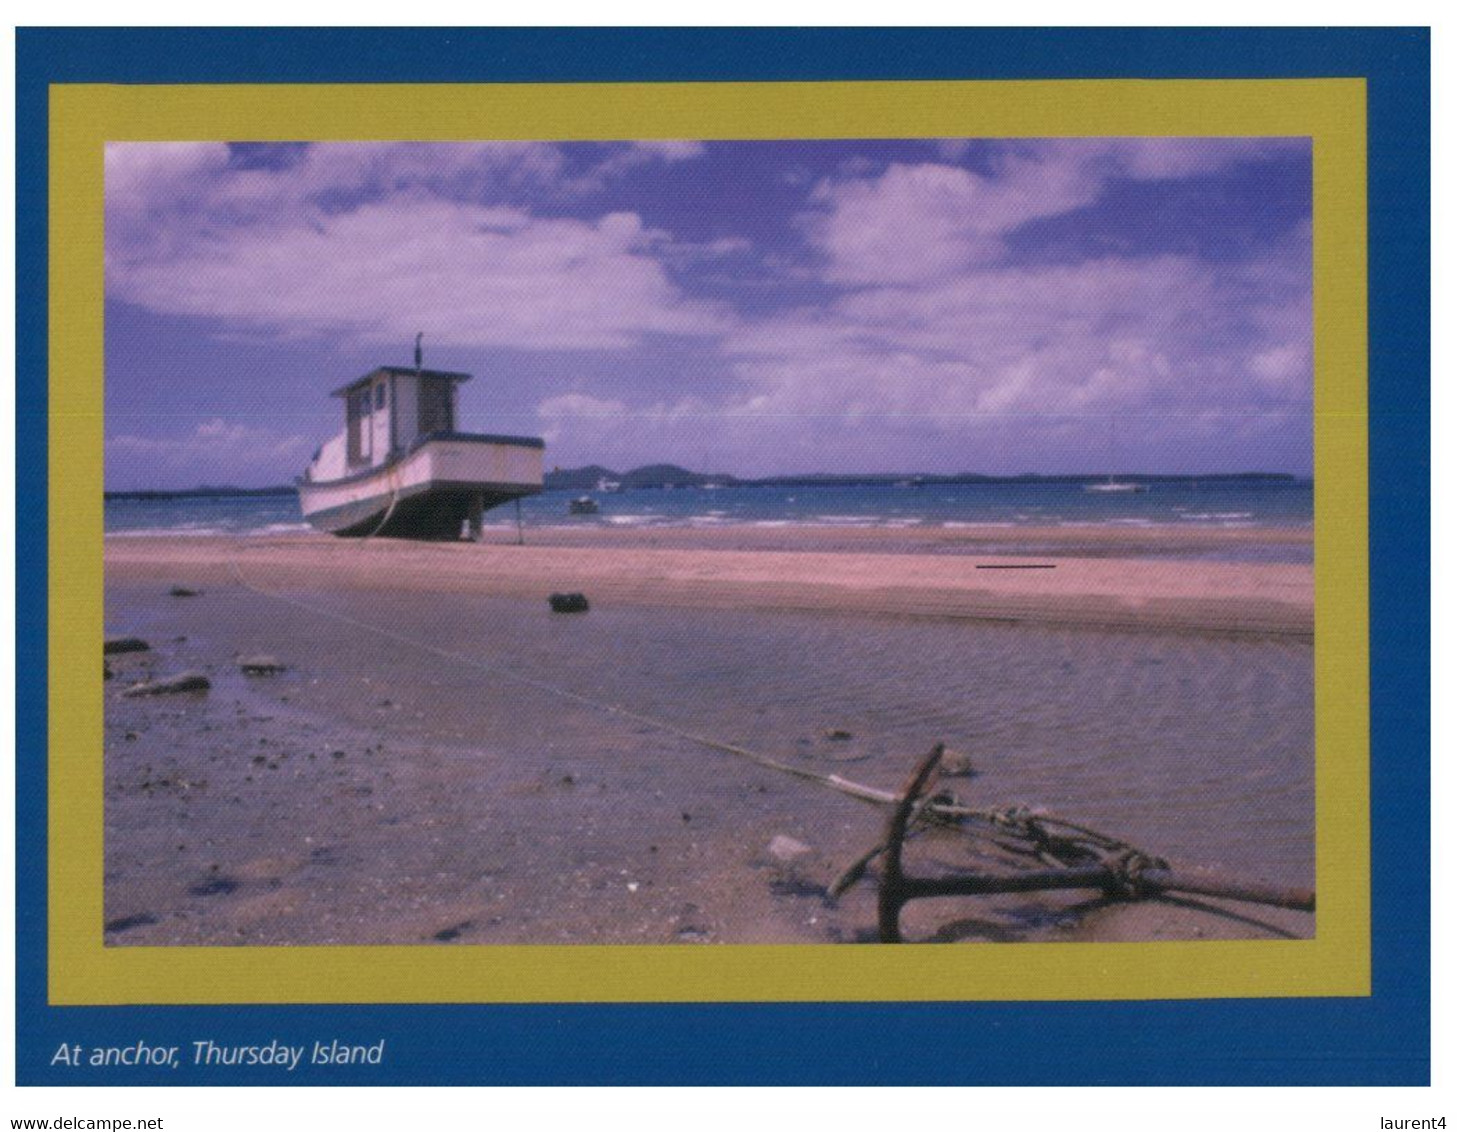 (HH 26) Australia - QLD - Thursday Island - Boat At Low Tide & Anchor - Unclassified